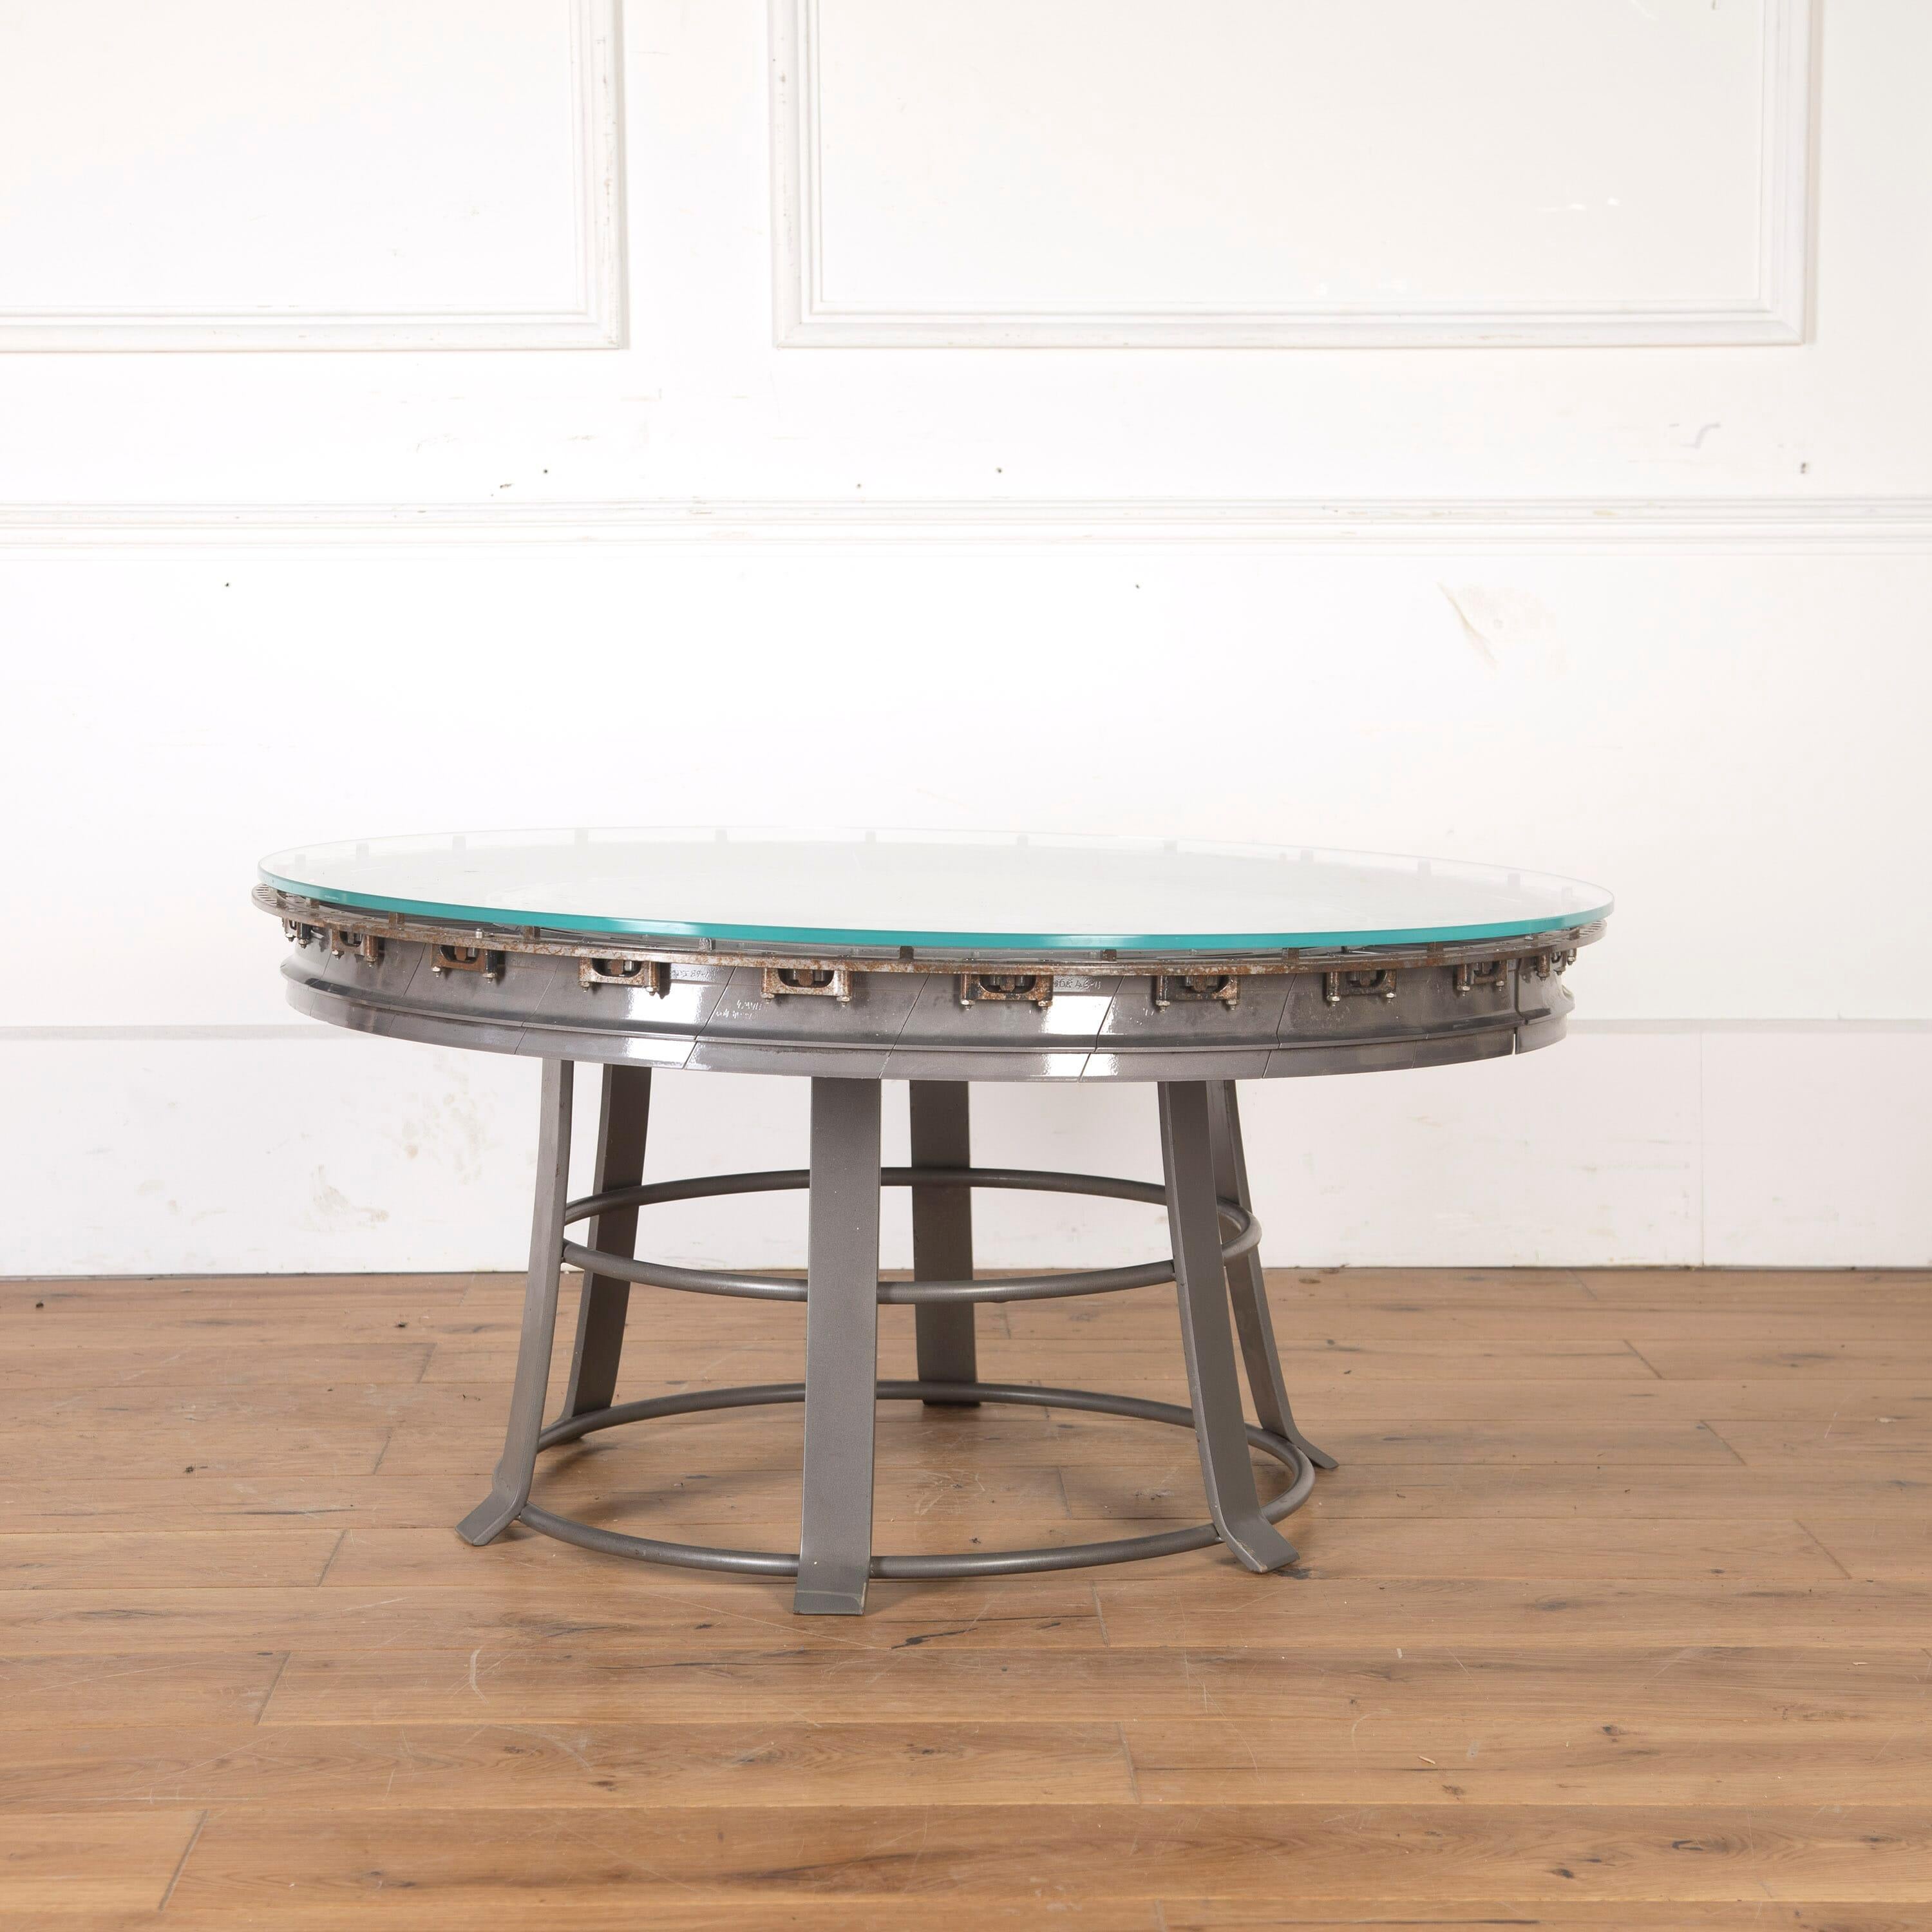 Spectacular glass-topped table, made from a turbine stator disc removed from a Rolls Royce Olympus TM3B gas turbine which belonged to the Royal Navy. 

The engine was removed from one of the invincible class aircraft carriers, and probably served